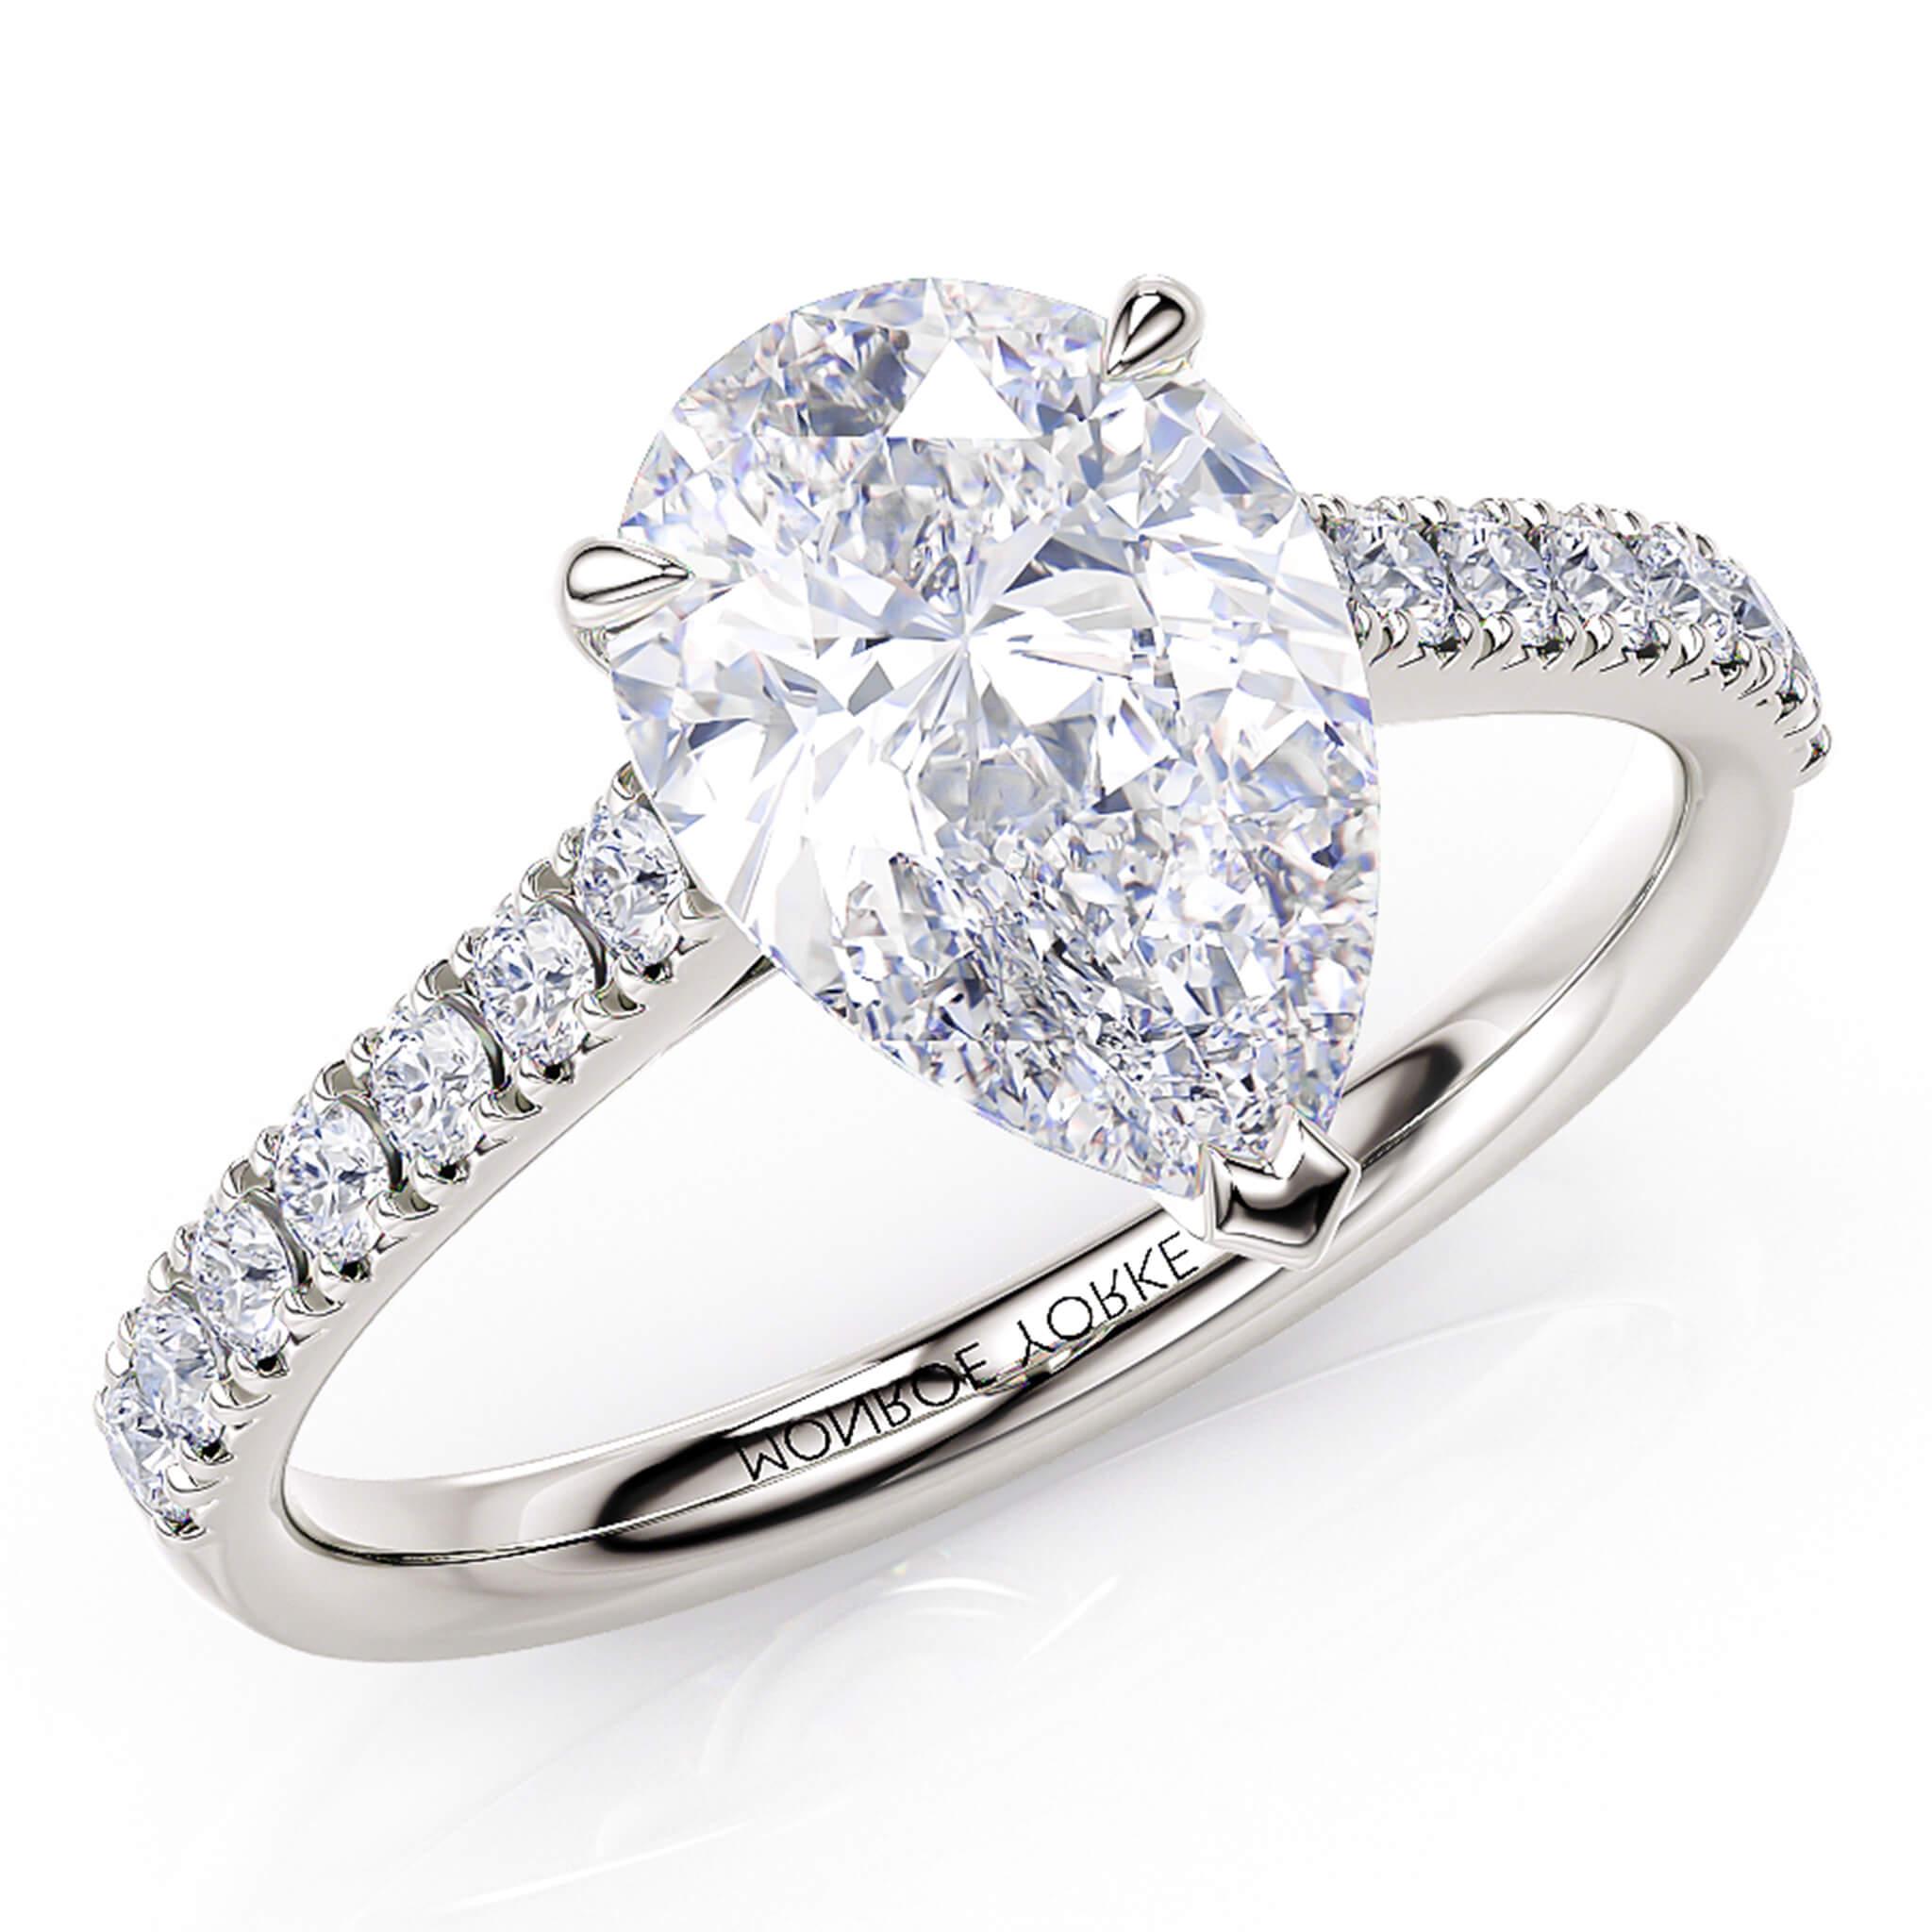 Karly pear cut diamond engagement ring.  Centre 3 claw setting.  Diamonds on the sweep up band. 18ct white gold or platinum. 